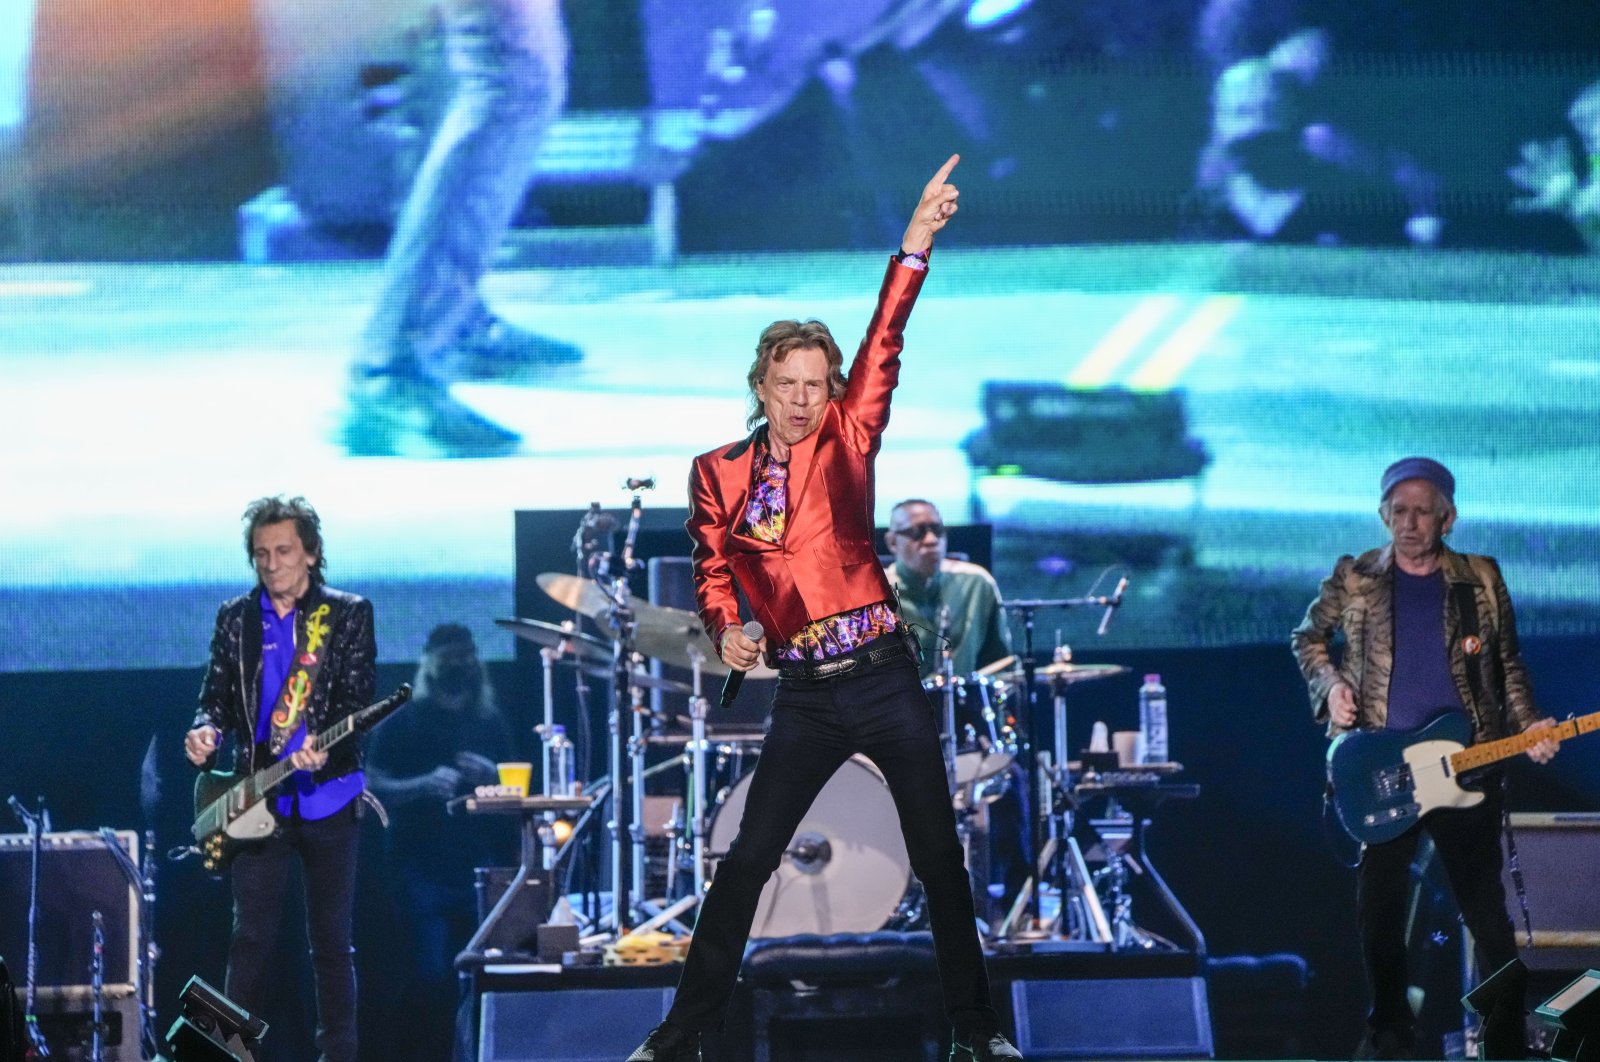 Mick Jagger, (C) Ronnie Wood, (L), and Keith Richards, (R) of the Rolling Stones perform during their SIXTY Stones Europe 2022 tour at the Wanda Metropolitano stadium in Madrid, Spain, June 1, 2022. (AP Photo)